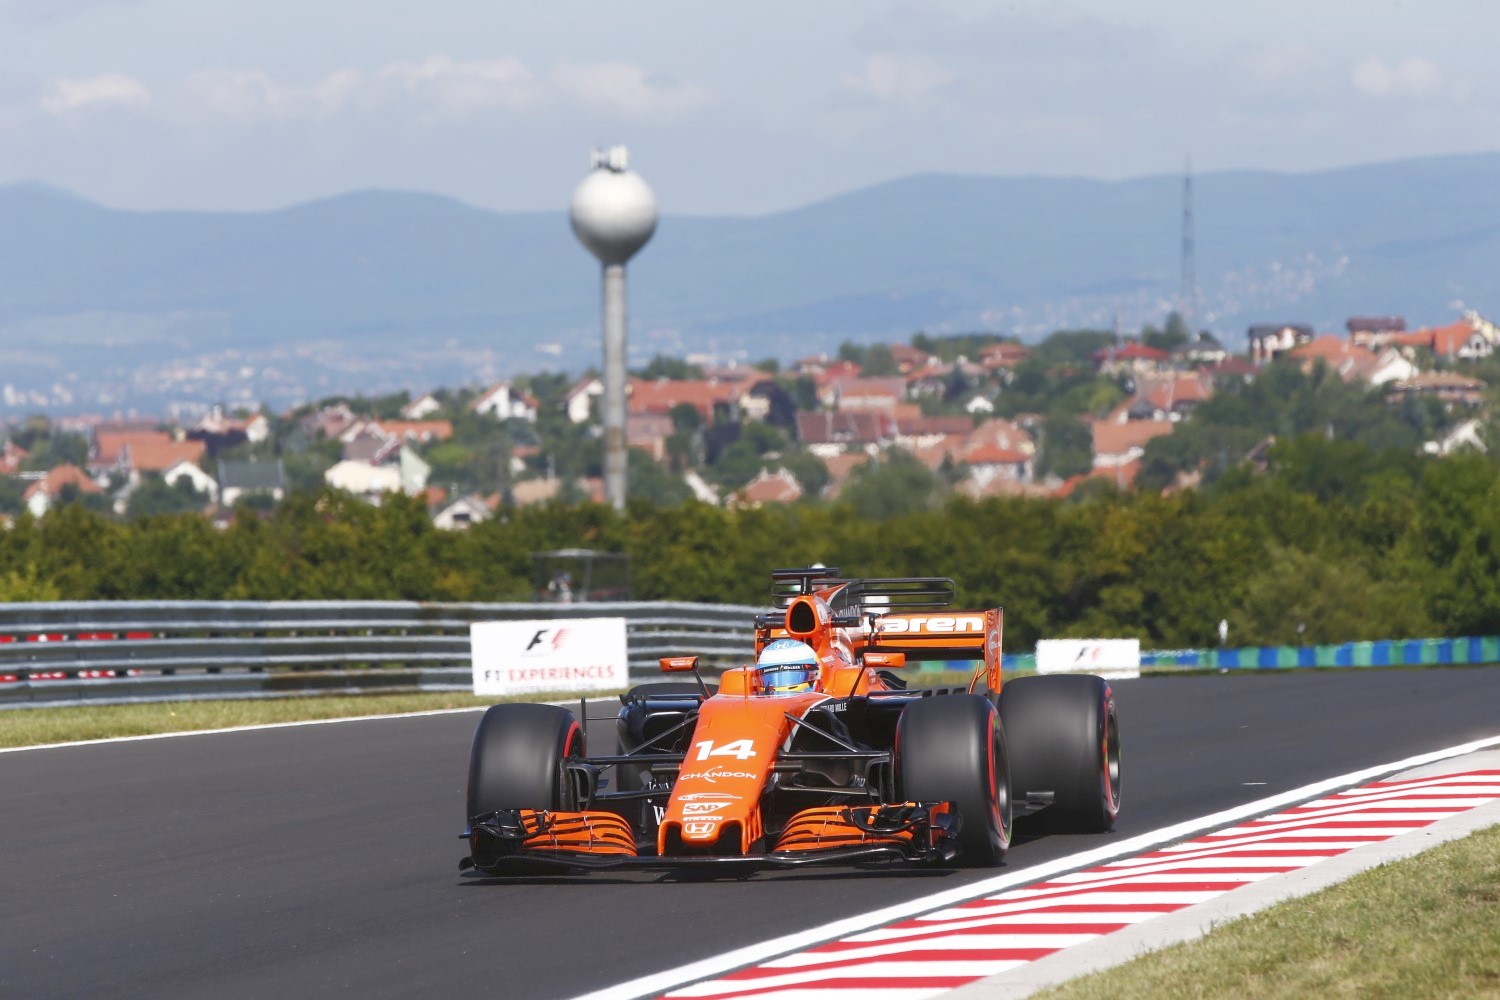 Alonso drives to 6th, plus turns fastest lap